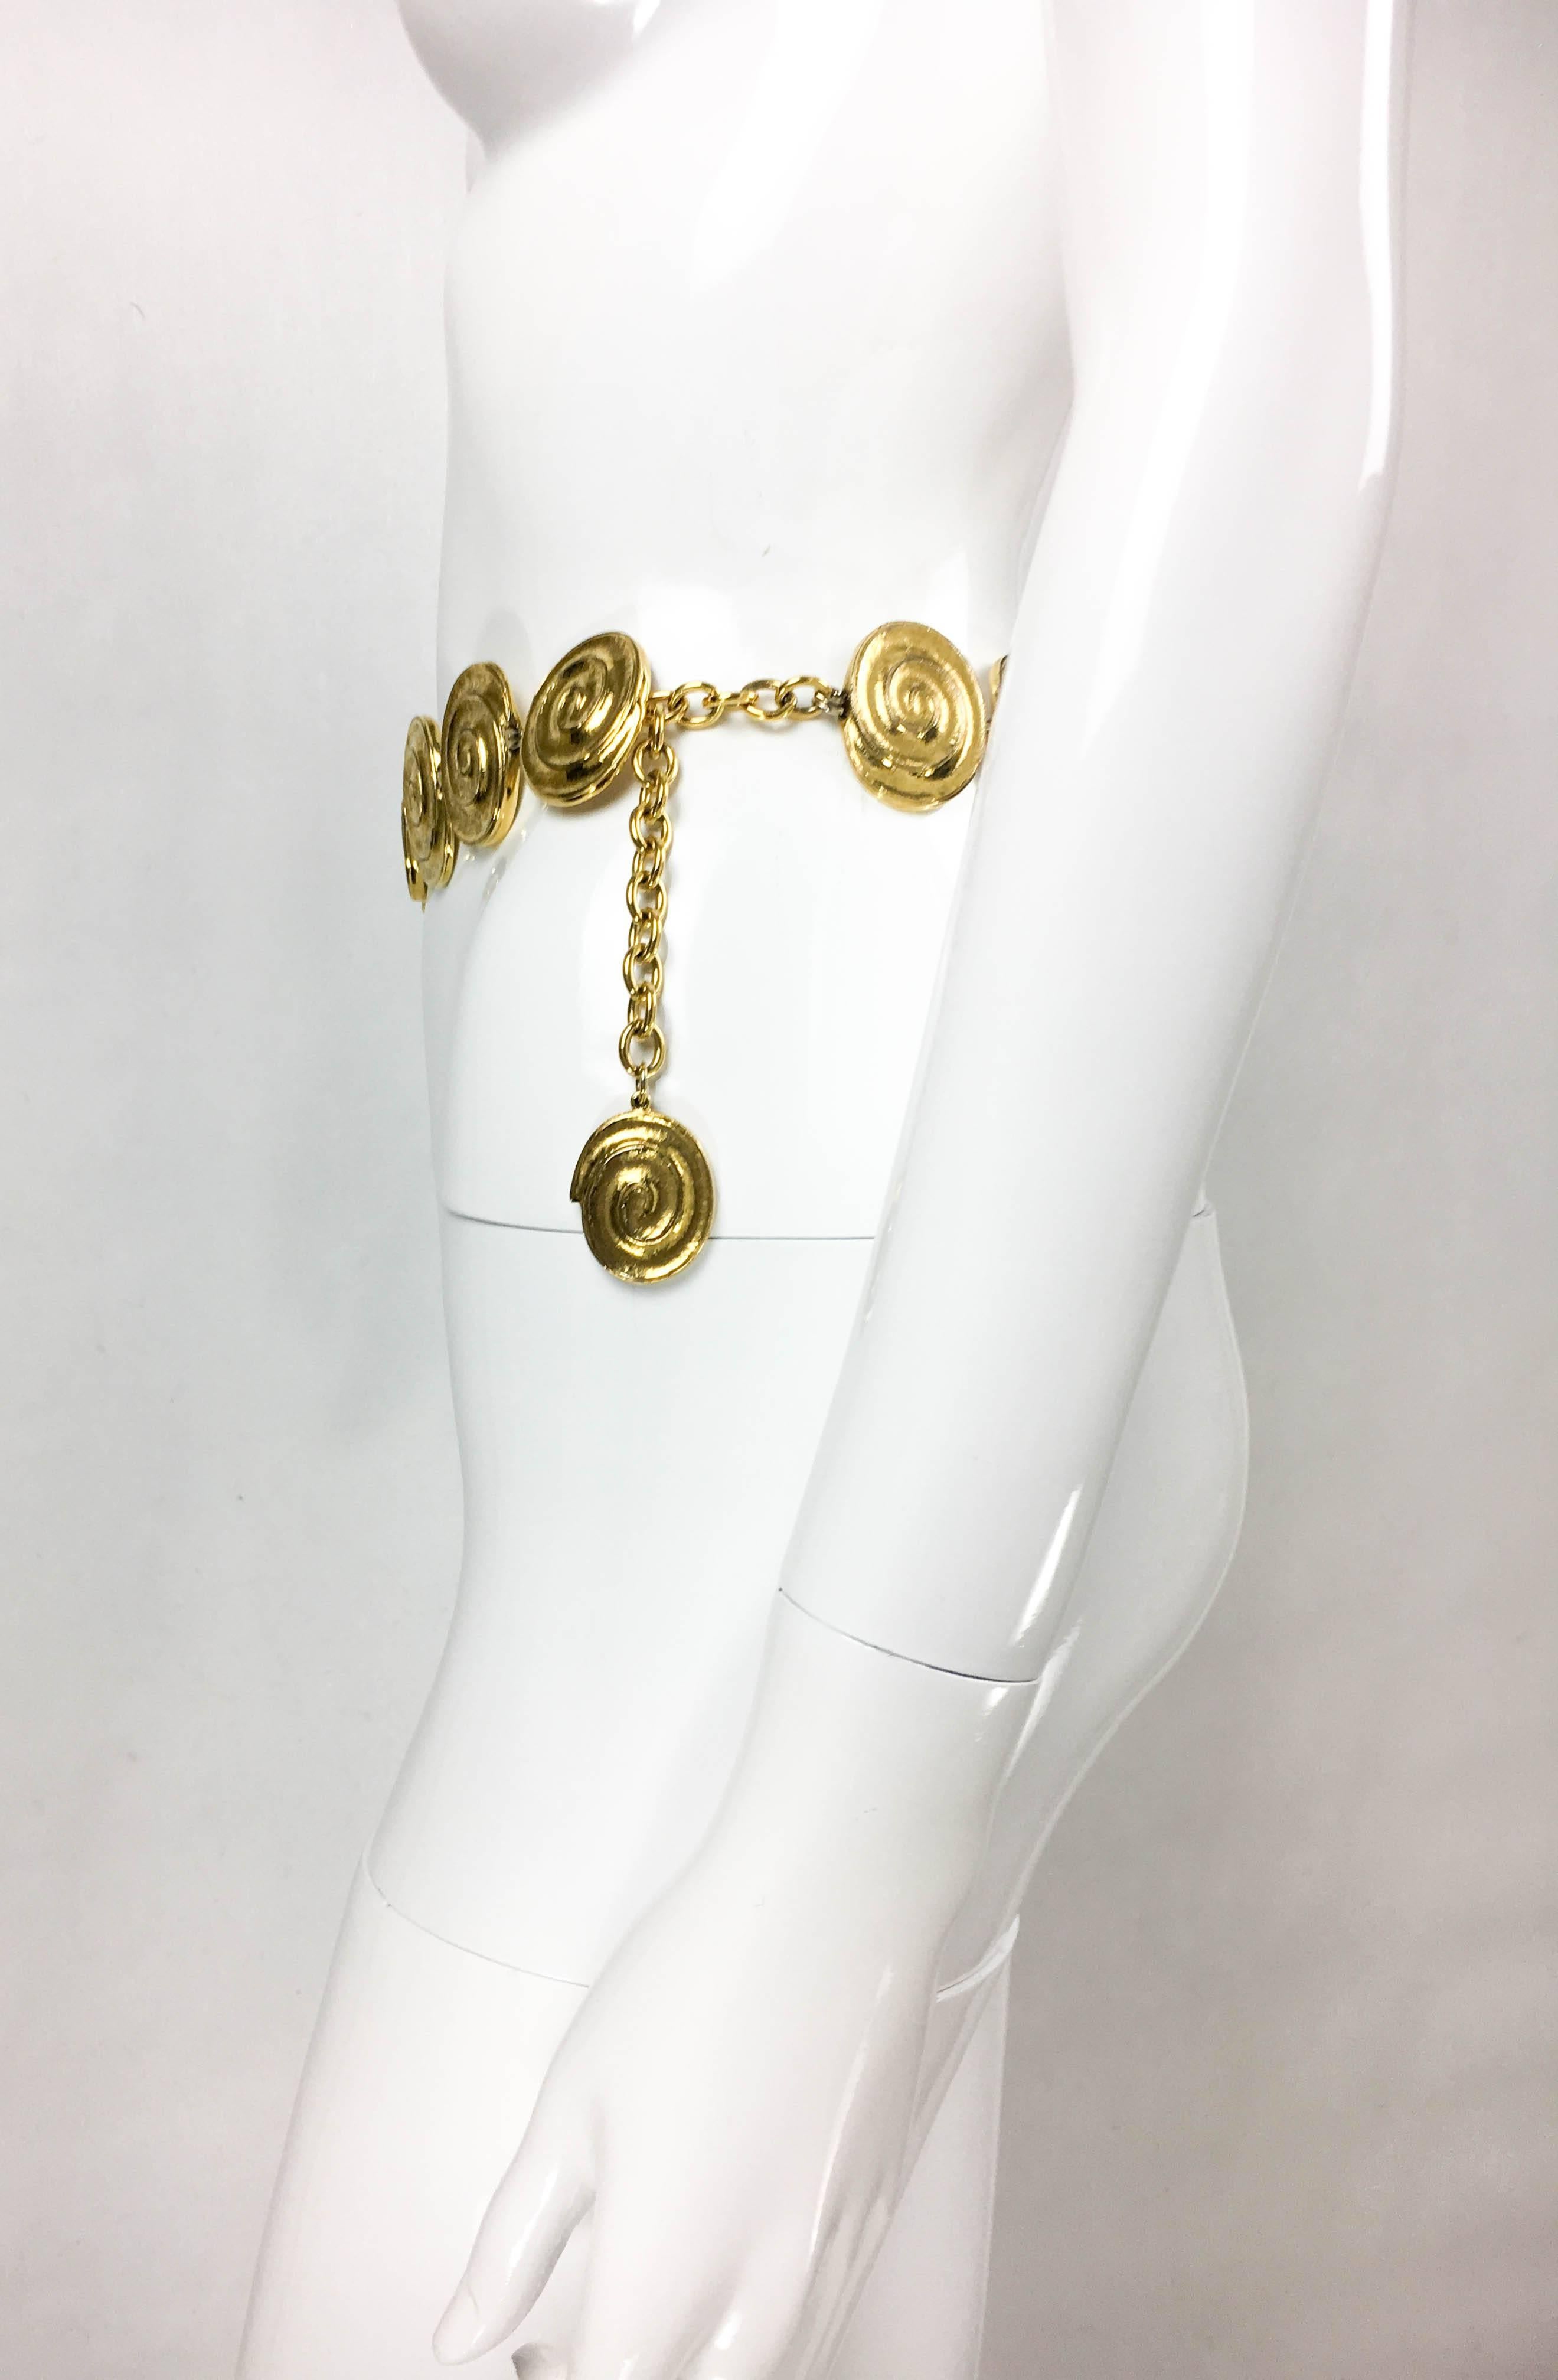 Yves Saint Laurent Gold-Plated 'Spiral' Belt / Necklace - 1980's In Excellent Condition In London, Chelsea